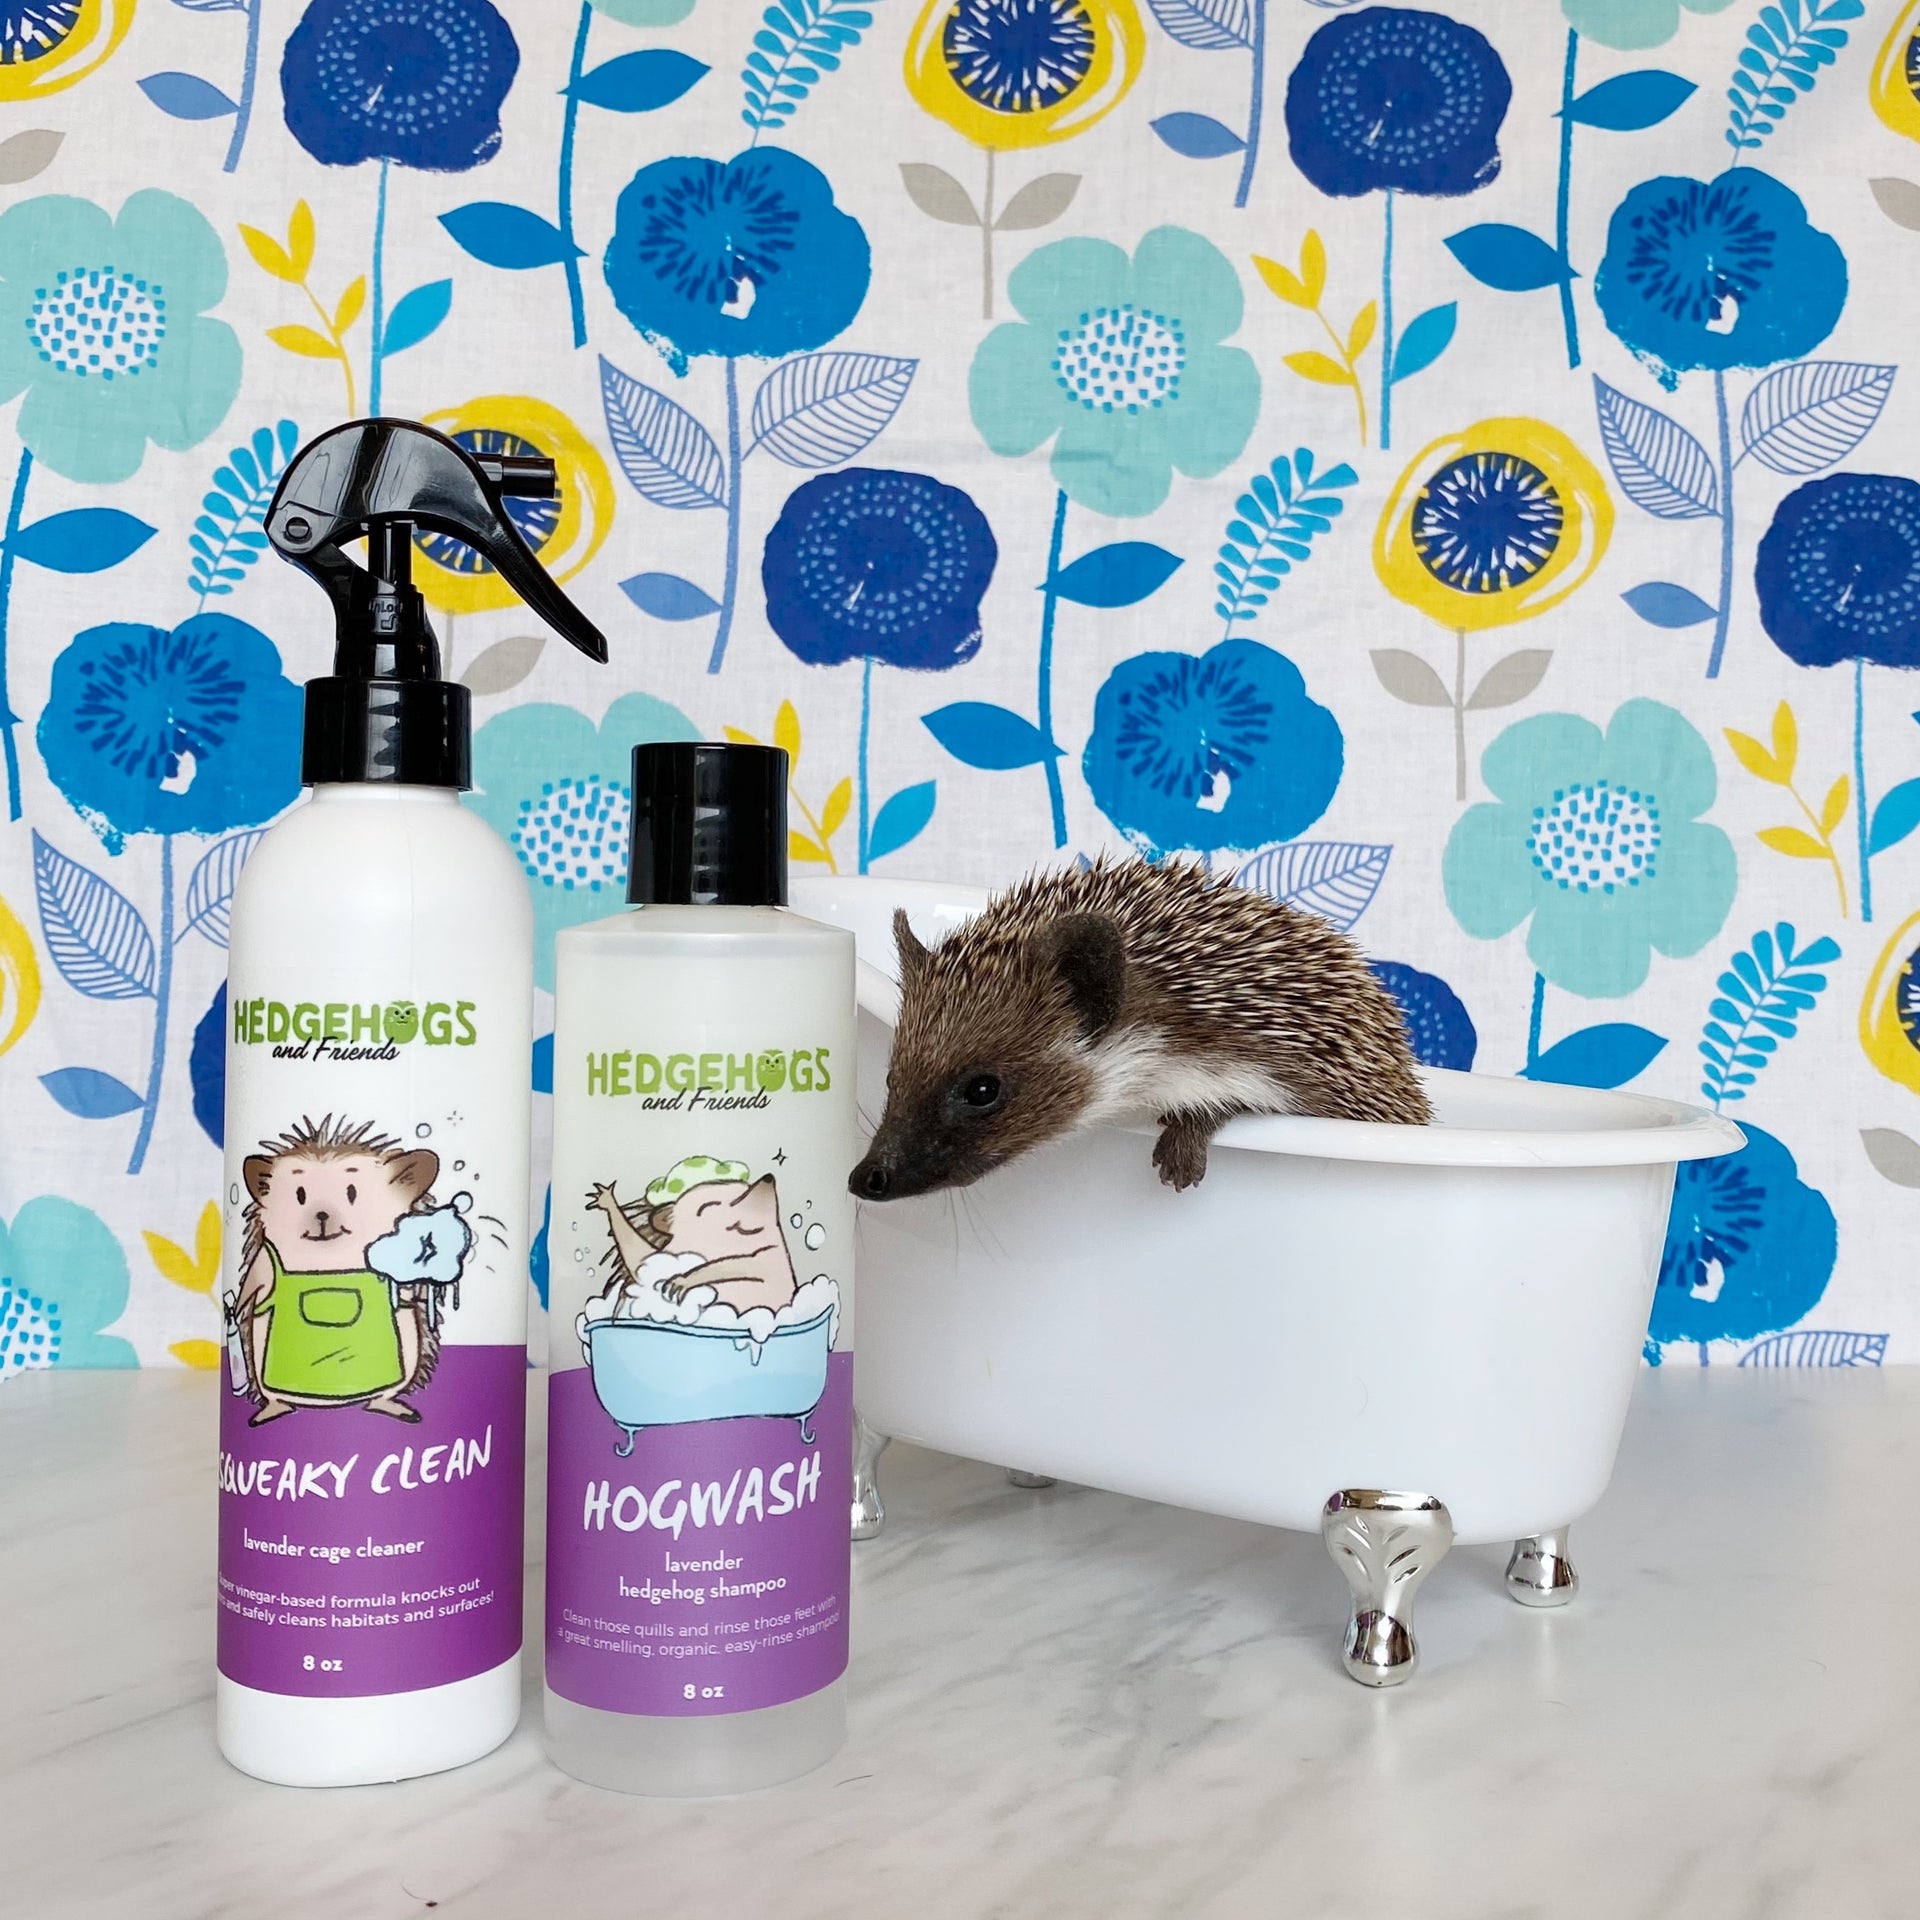 Nature's Miracle Hedgehog Cage Scrubbing Wipes -  —  The Hedgehog Store